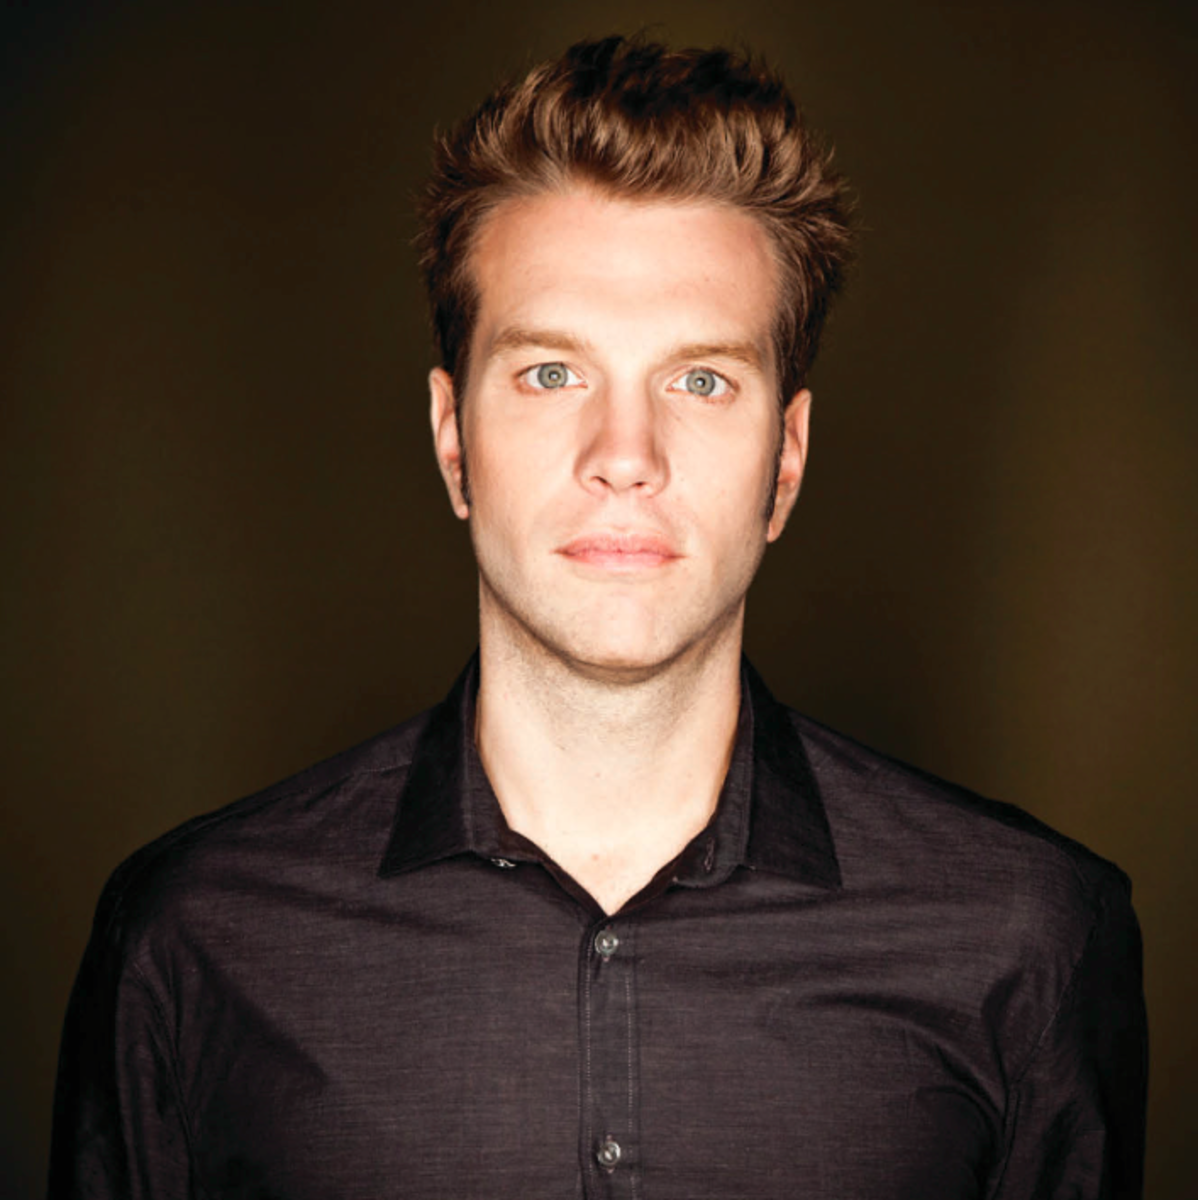 Anthony Jeselnik, the headlining at at the Comedy Central show. Photo courtesy of OP